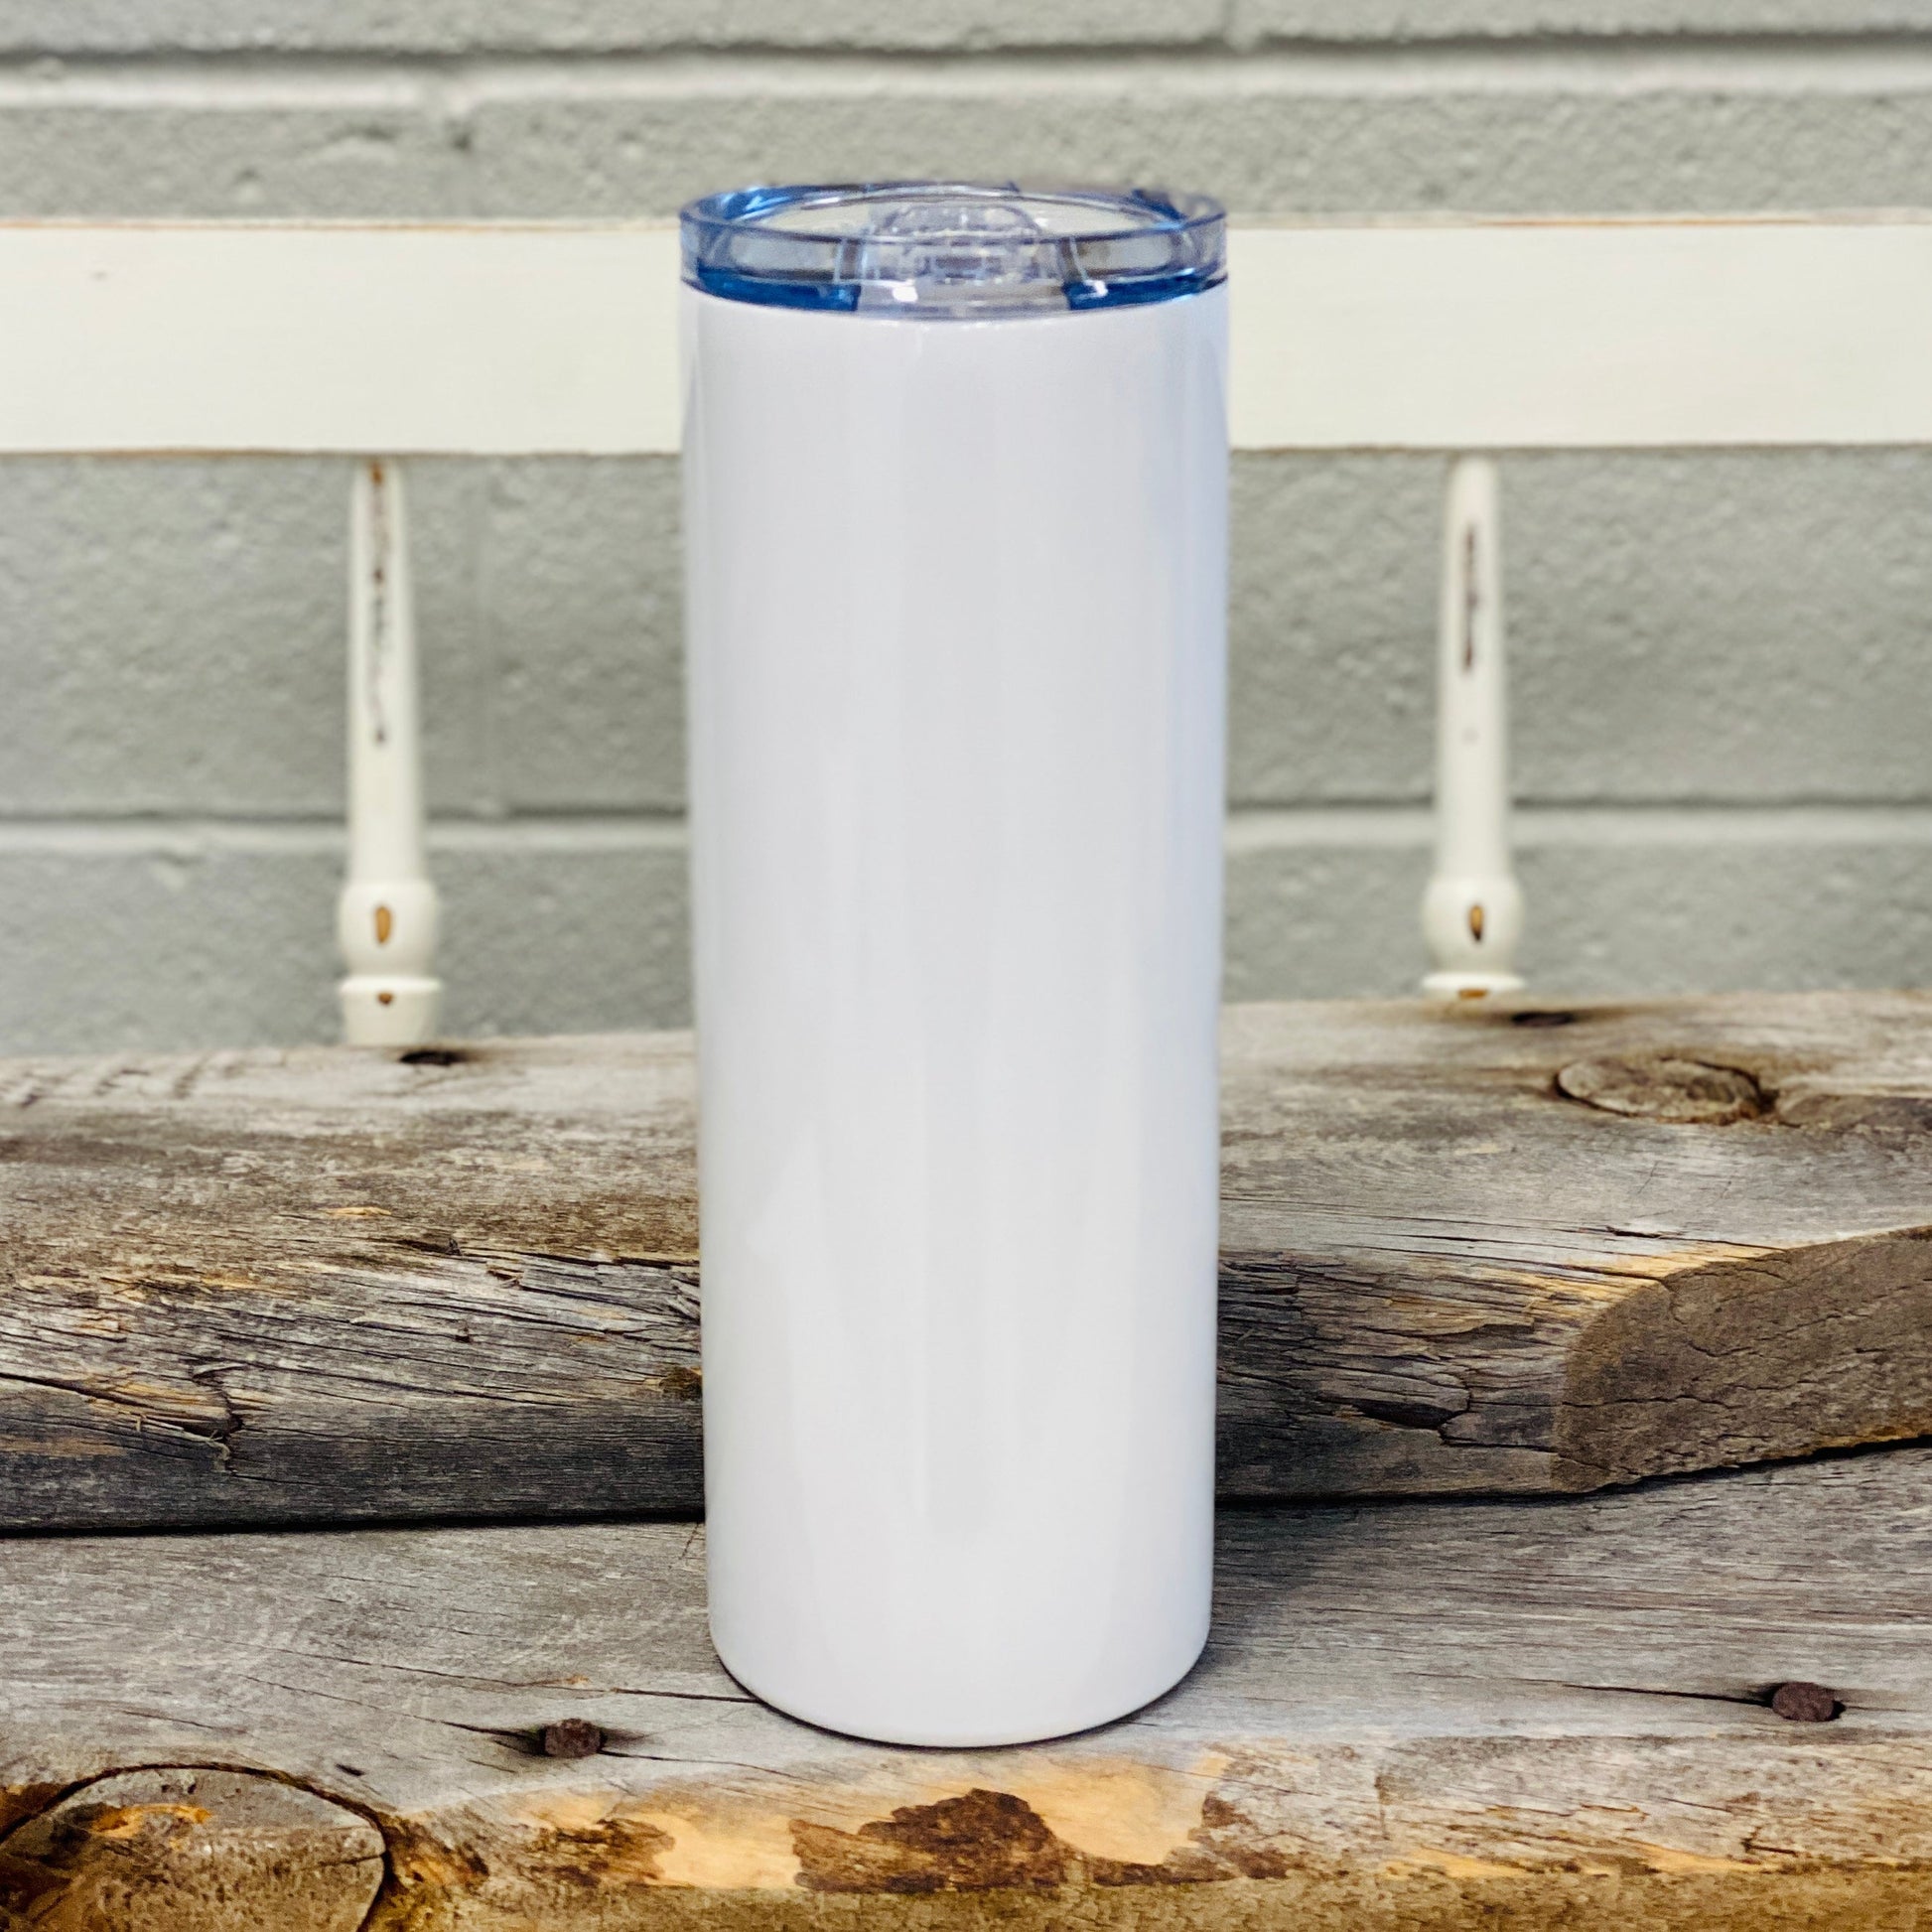 20oz, White Luma Steel™ Stainless Steel Skinny Tumbler, with clear lid and metal straw. 8" x 2 7/8" dia. This popular tumbler design is great for both men and women. Available in white.